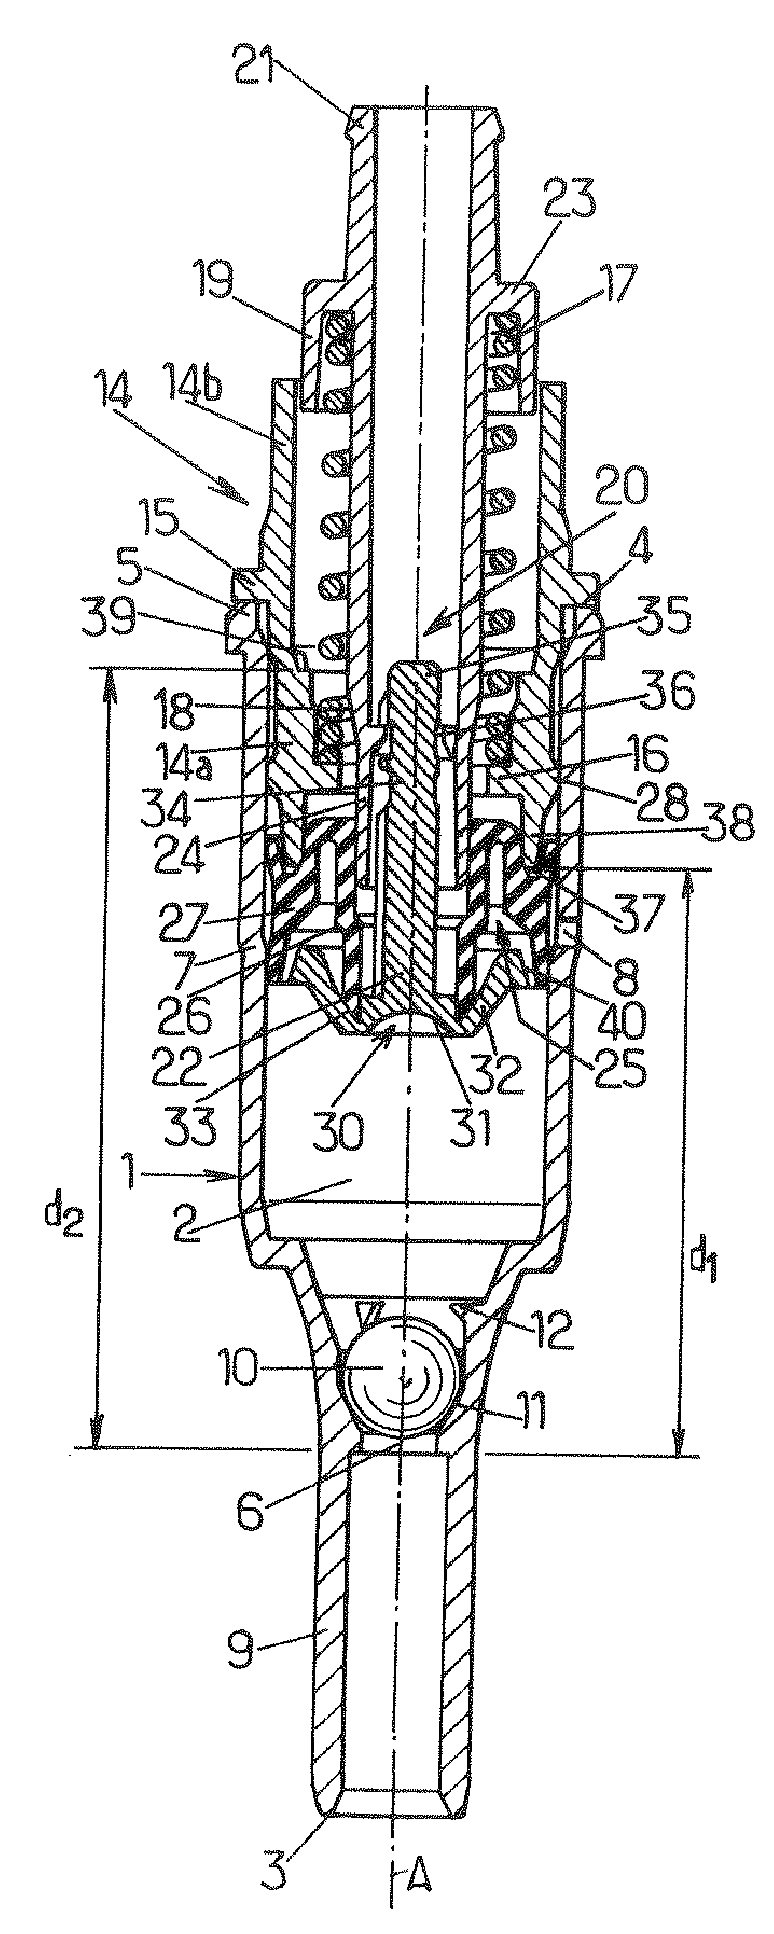 Pump for Dispensing a Dose of a Fluid Product and Range Comprising Such Pumps